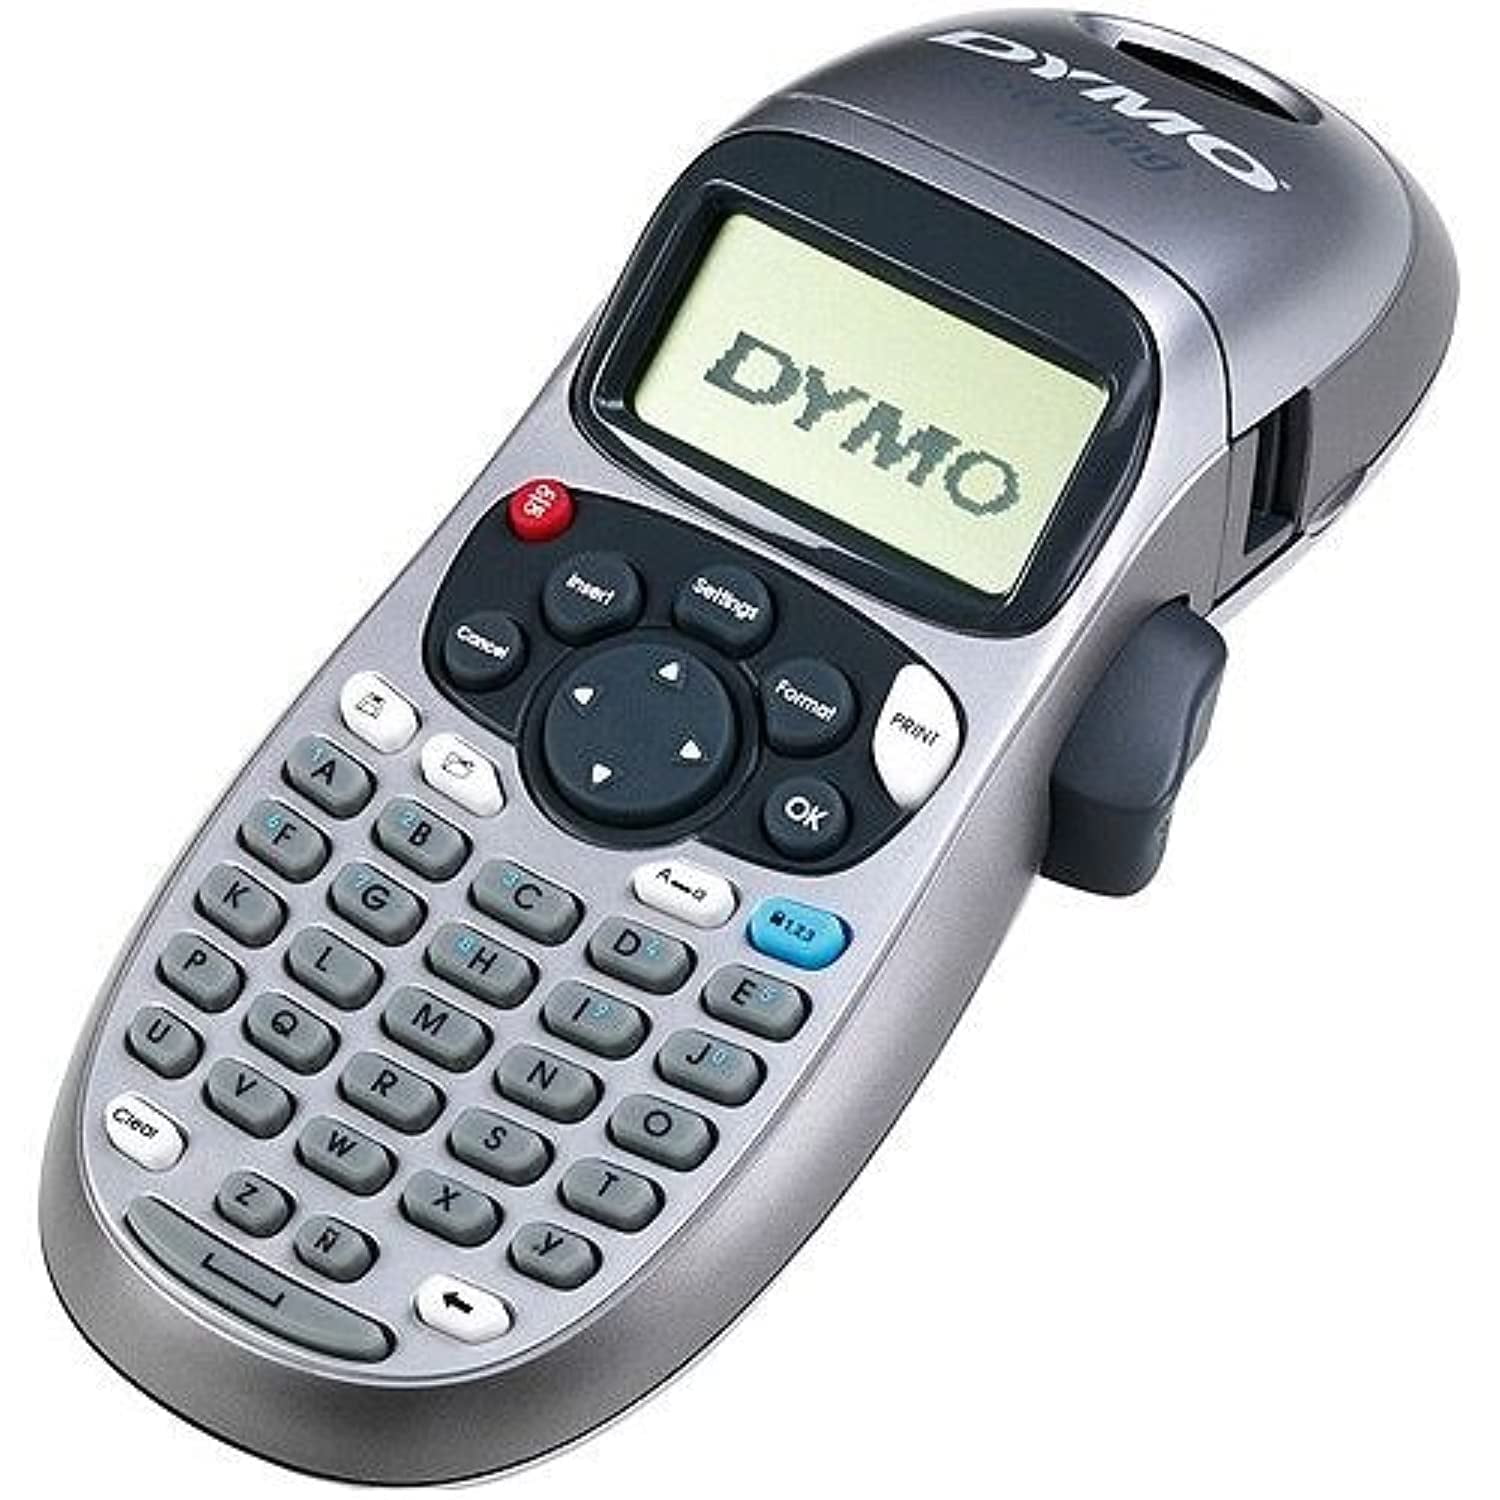 DYMO Label Maker | LabelManager 280 Rechargeable Portable Label Maker,  Easy-to-Use, One-Touch Smart Keys & Standard D1 Self-Adhesive Polyester  Tape